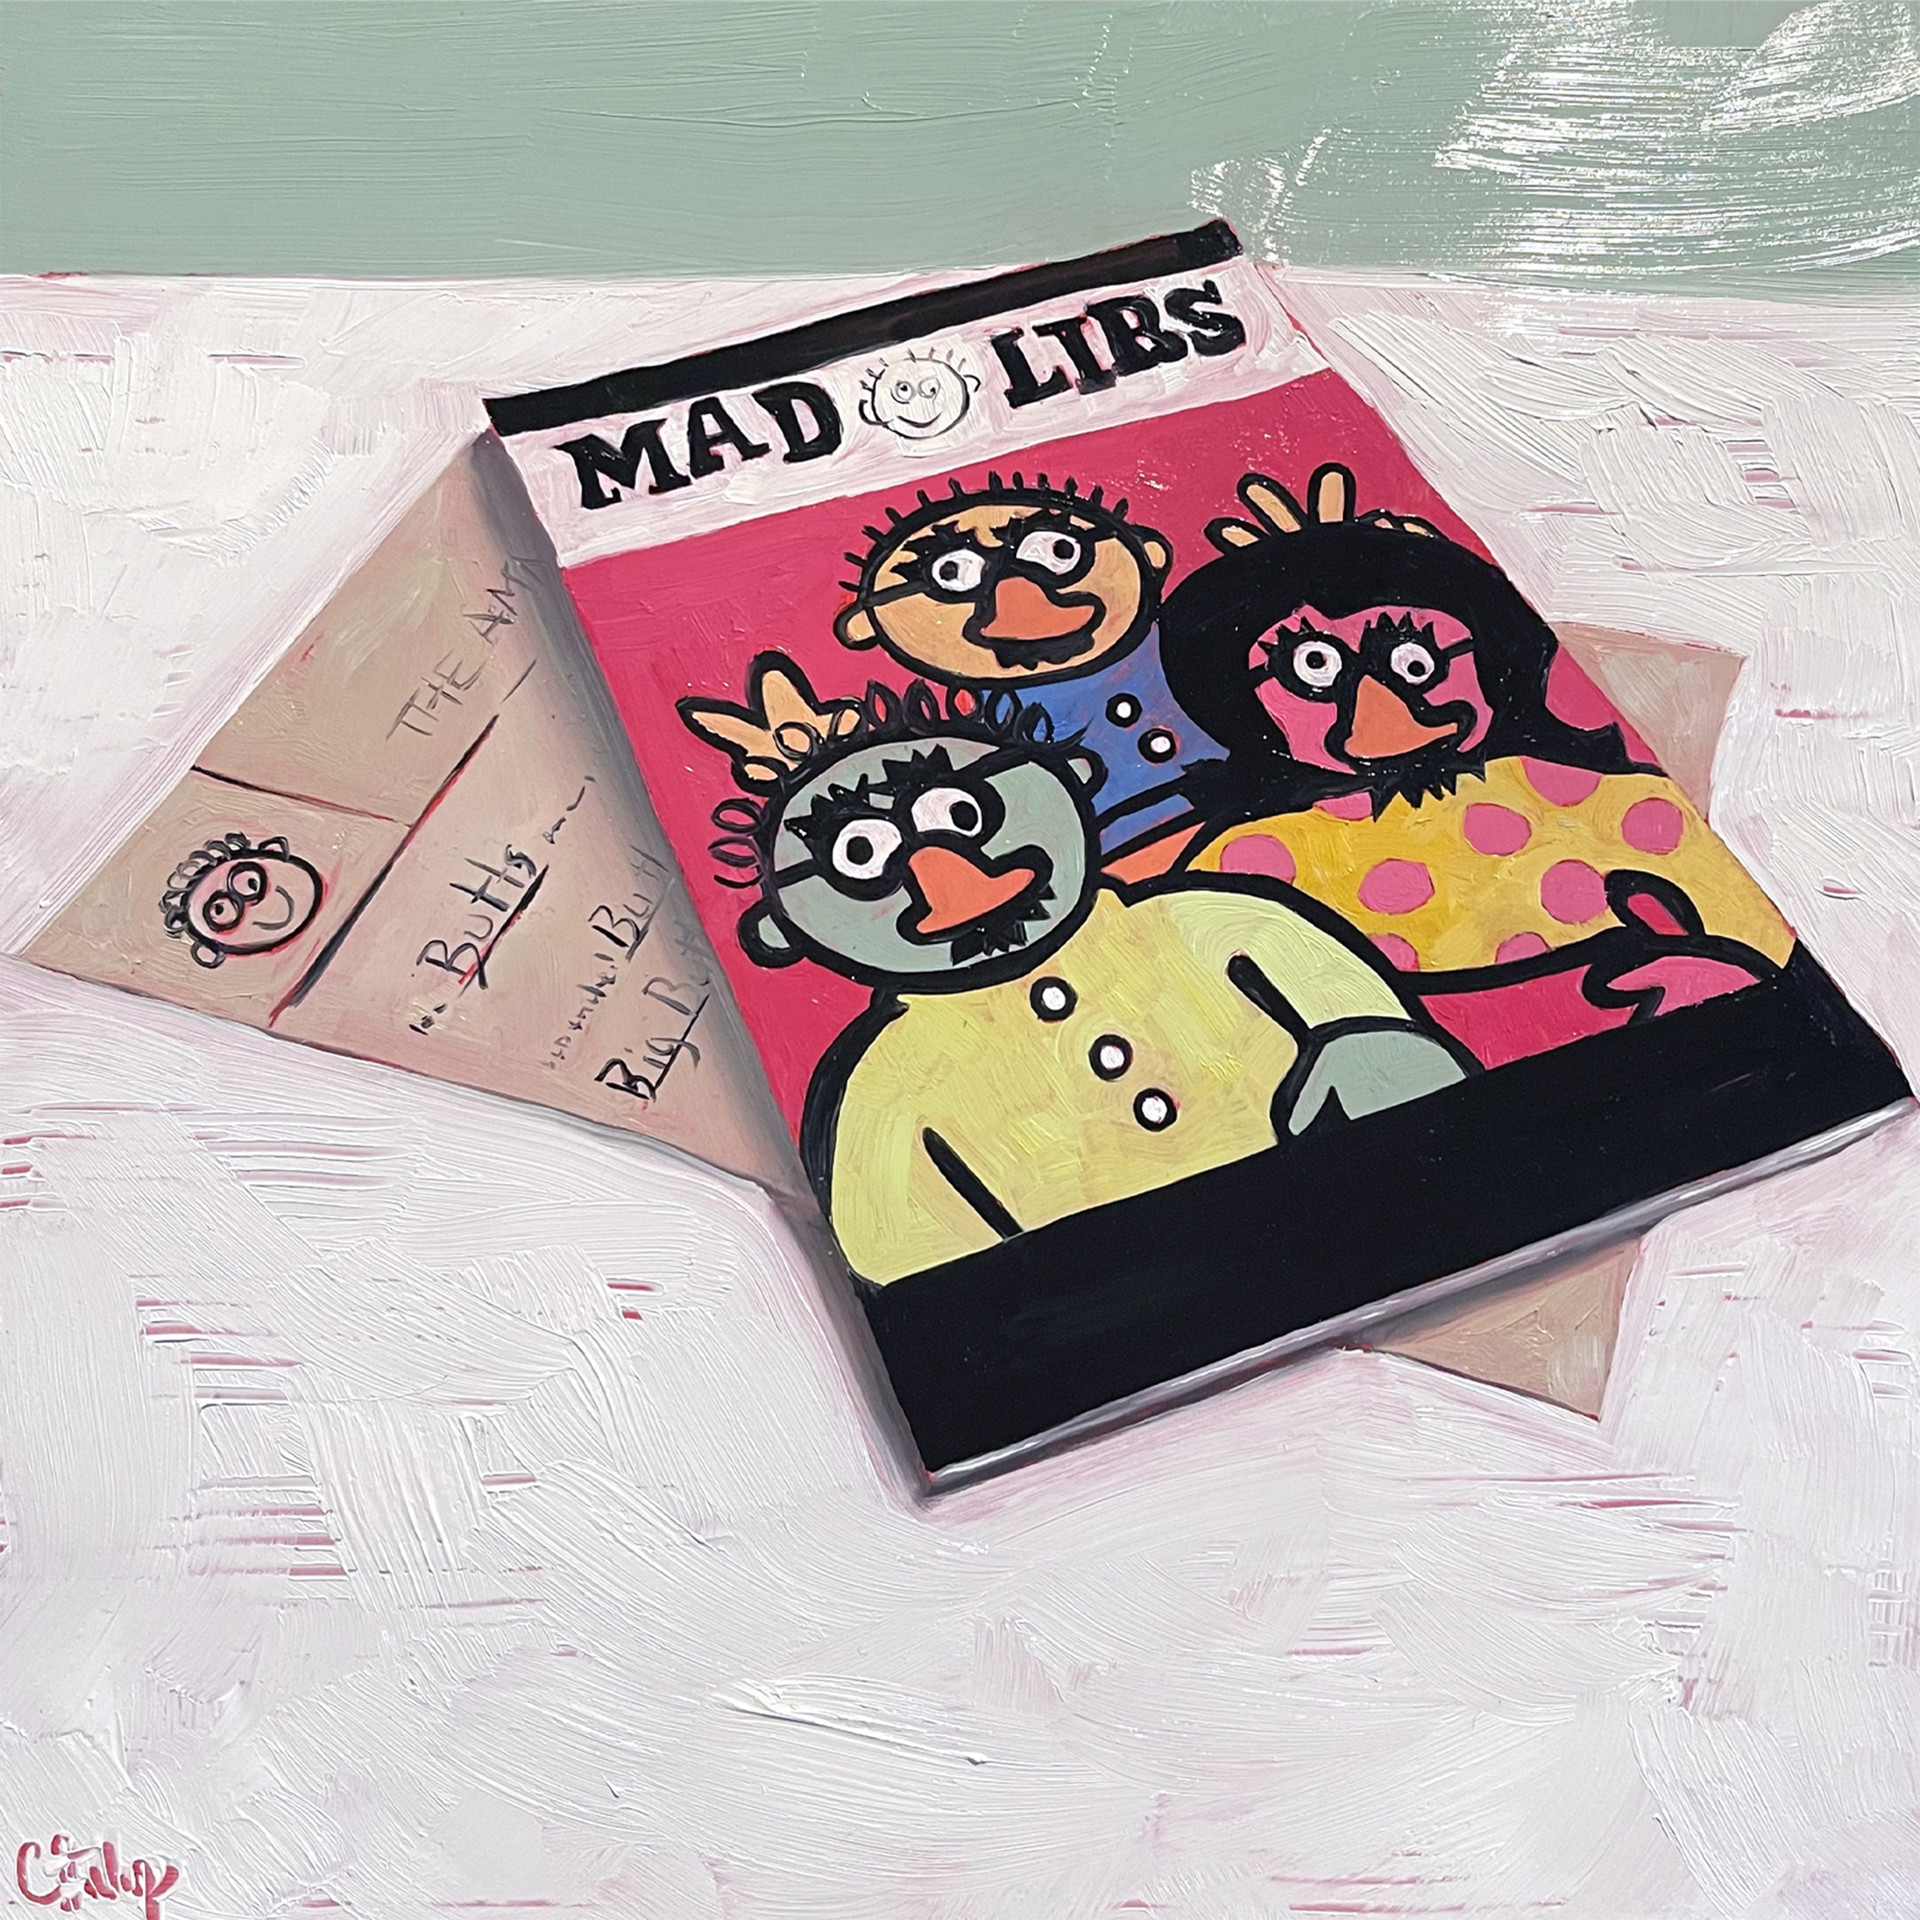 Mad Lib by Christy Stallop